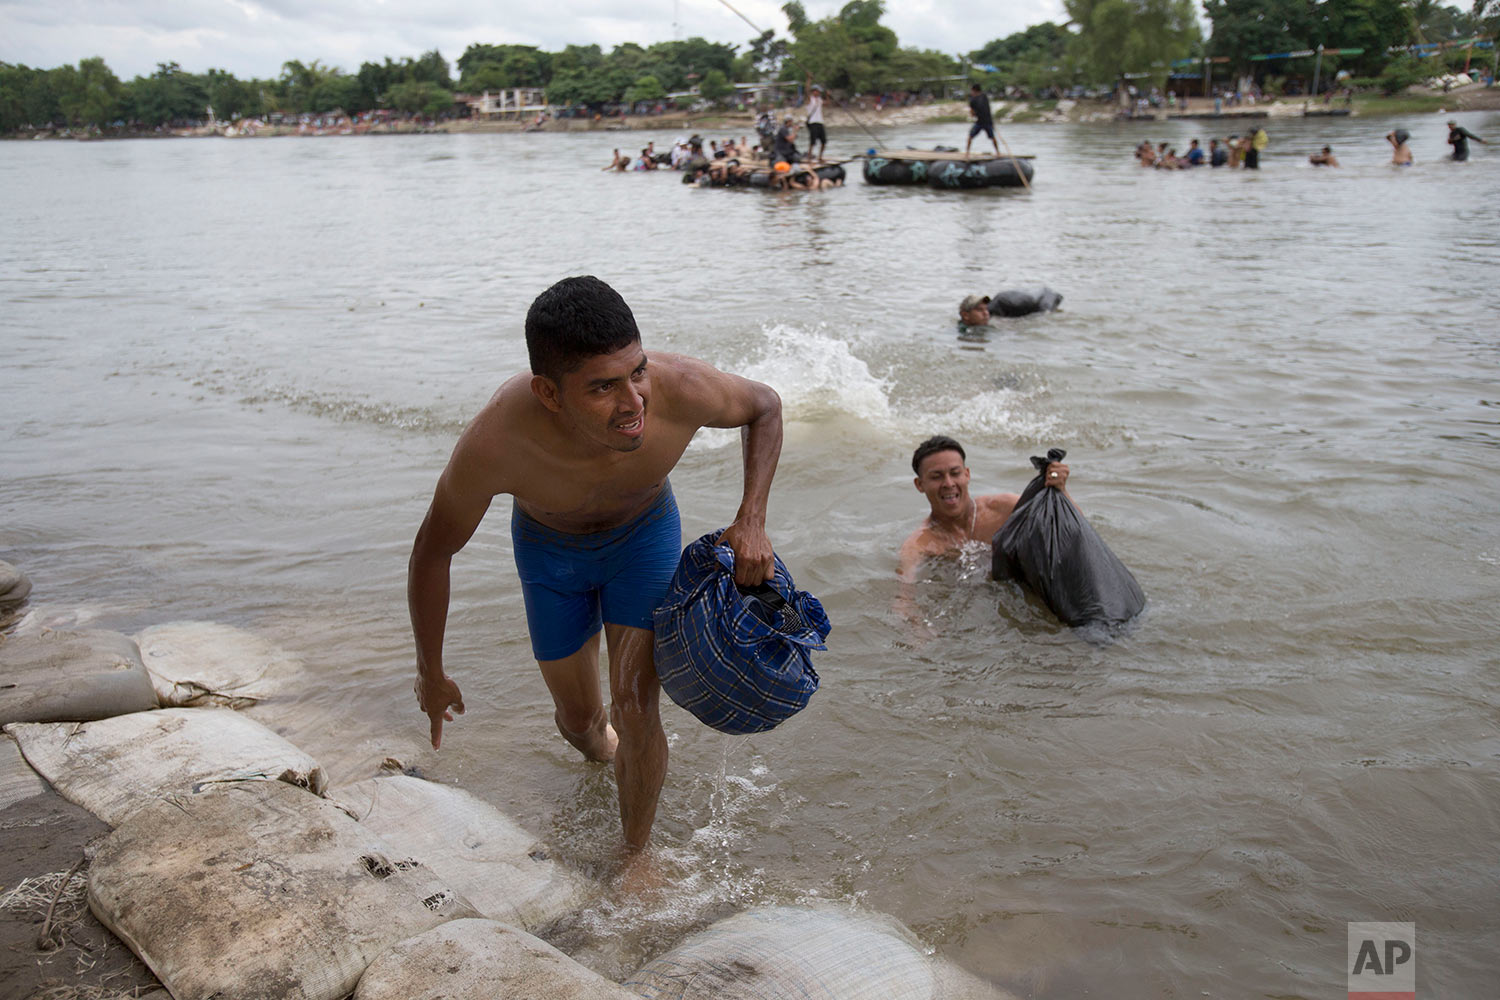  Central American migrants reach the shore on the Mexican side of the Suchiate River after wading across, on the the border between Guatemala and Mexico, in Ciudad Hidalgo, Mexico, Saturday, Oct. 20, 2018. (AP Photo/Moises Castillo) 